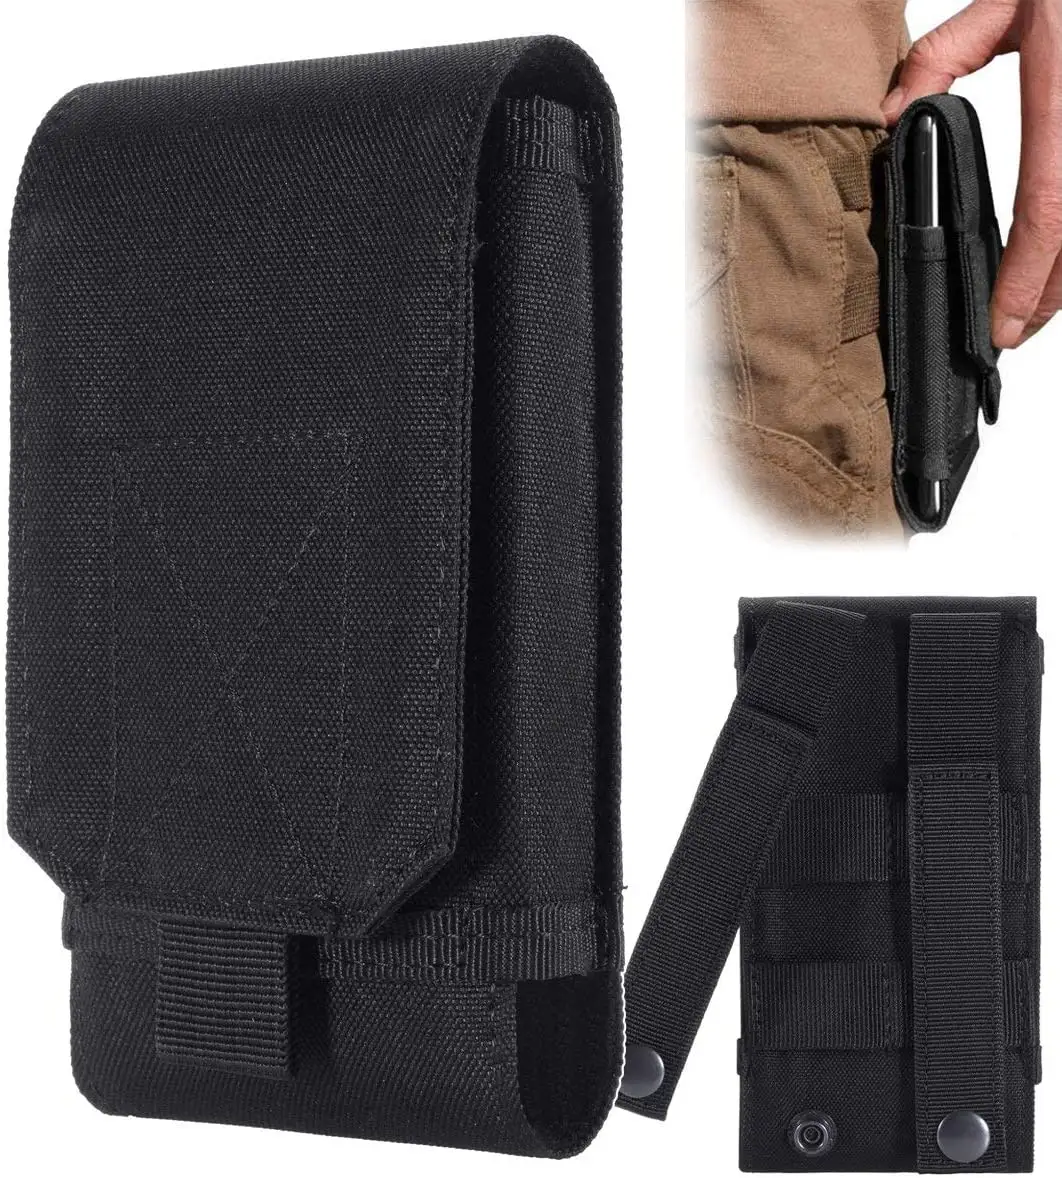 6" Molle Cellphone Pouch Mobile Phone Carry Bag Universal EDC Security Pack Accessory Kit Waist Bag Phone Cover Case